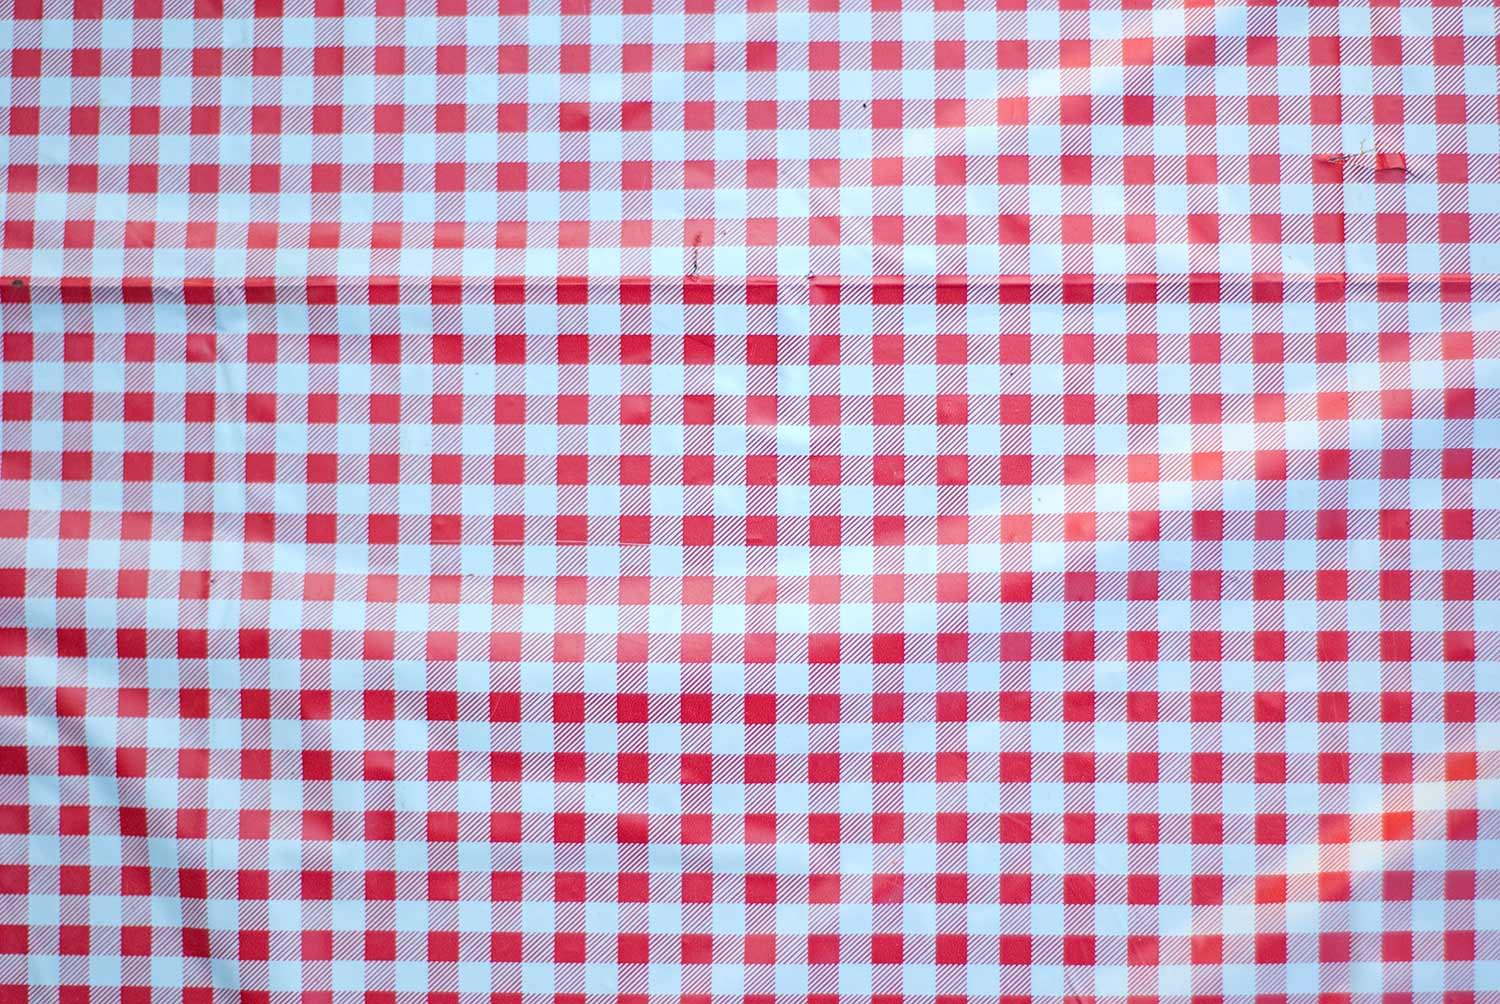 A red and white picnic blanket